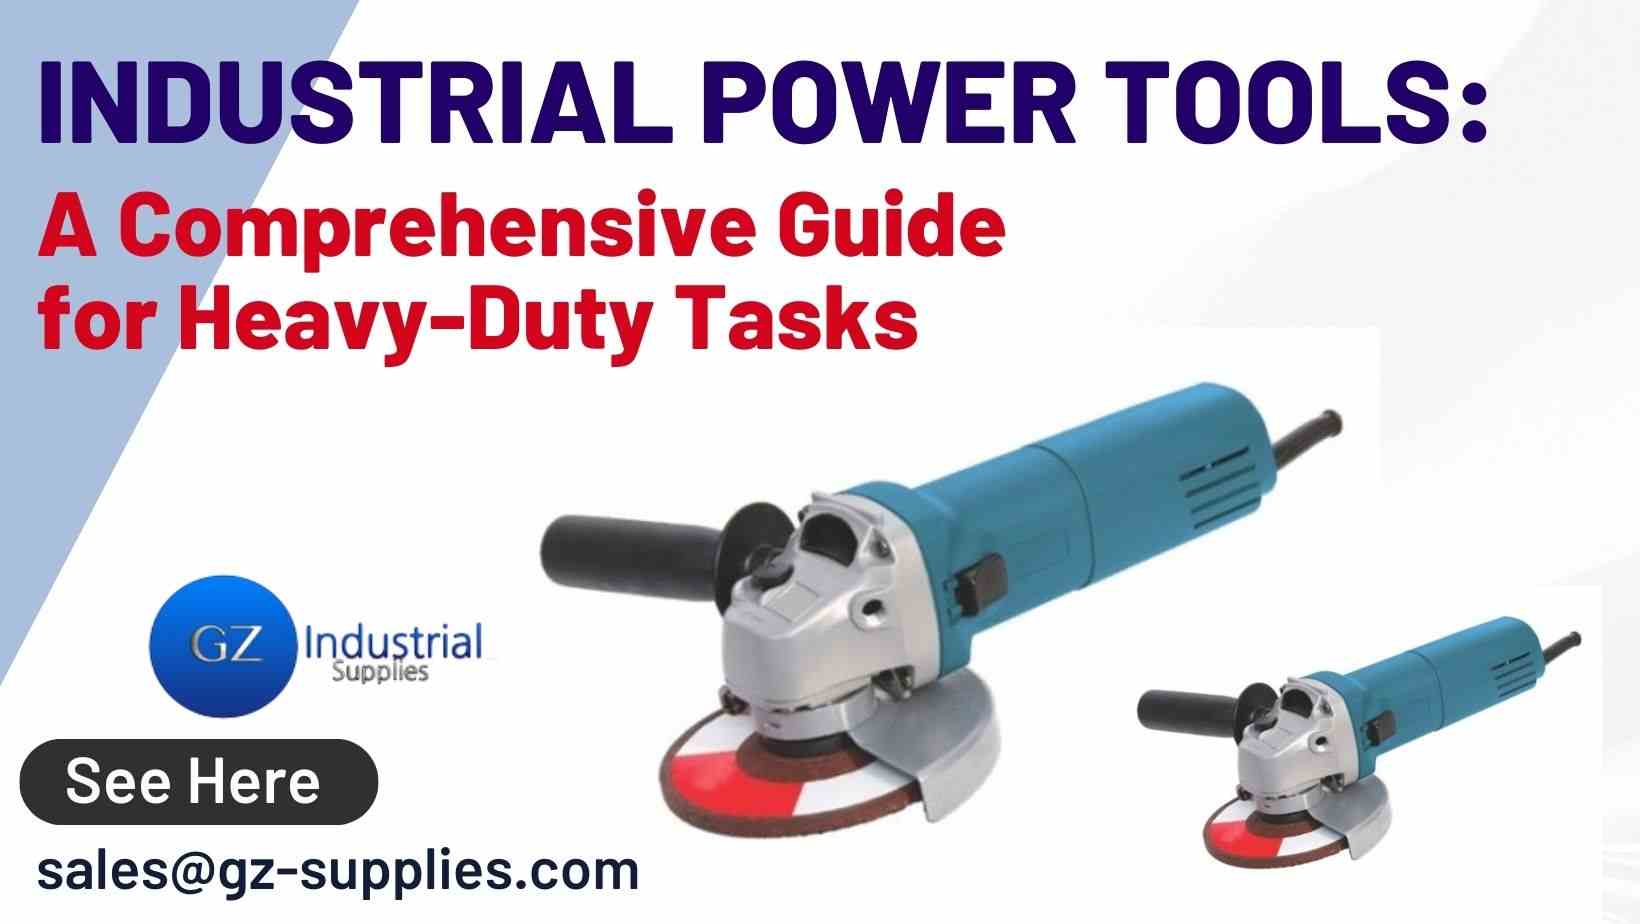 Industrial Power Tools: A Comprehensive Guide for Heavy-Duty Tasks